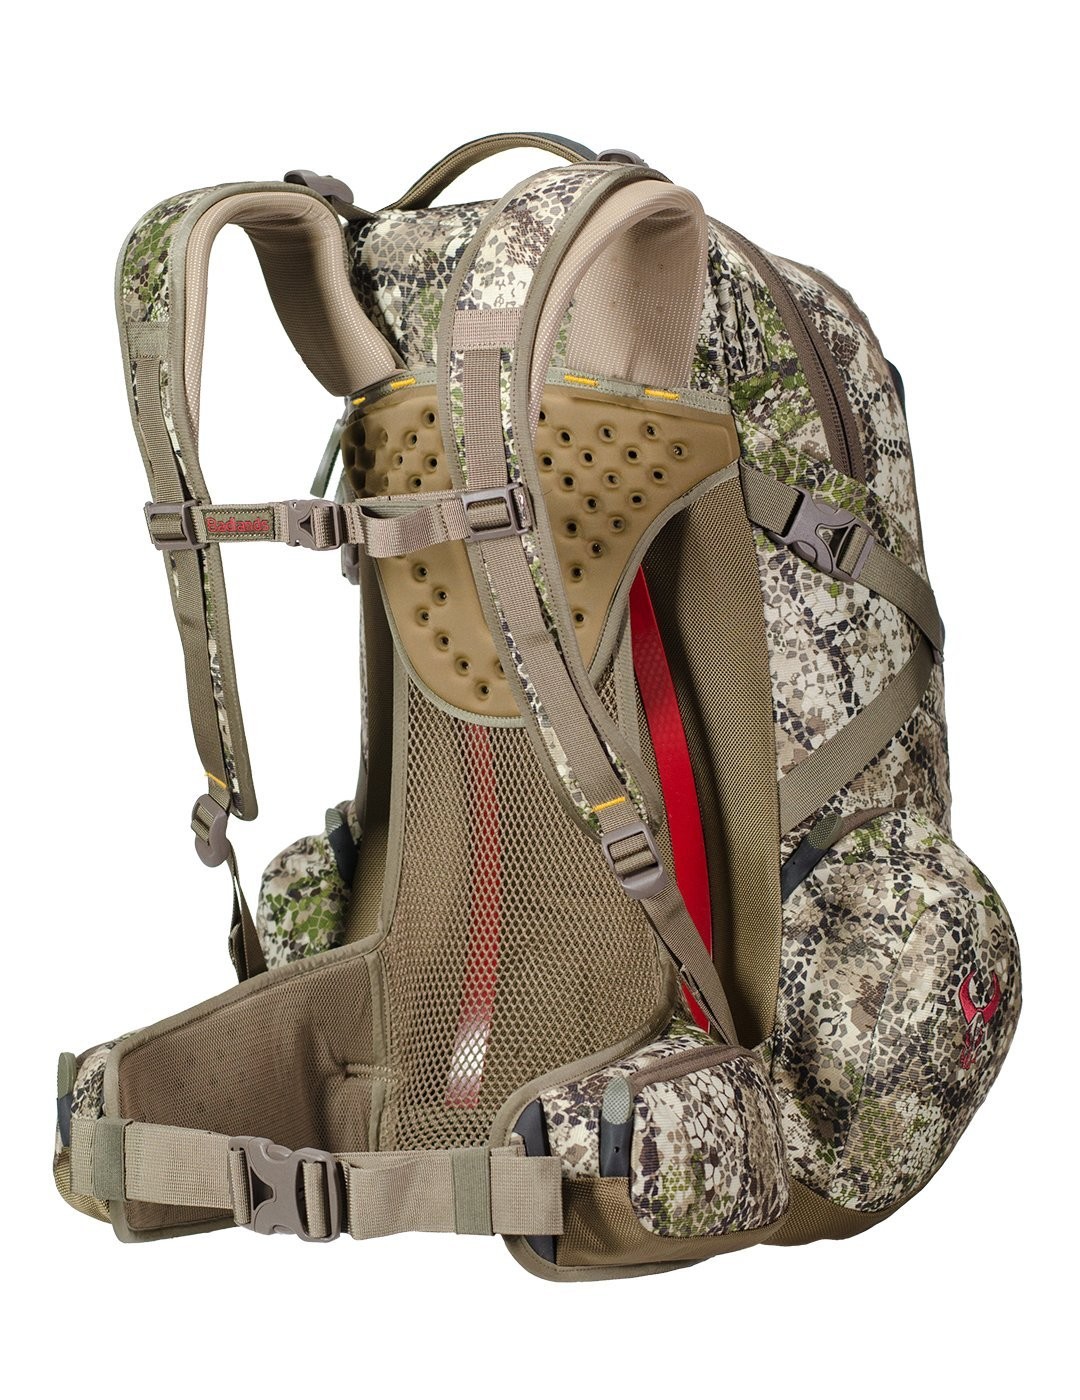 Badlands 21-12876 Diablo Dos Approach Camo Hunting Pack - image 2 of 5